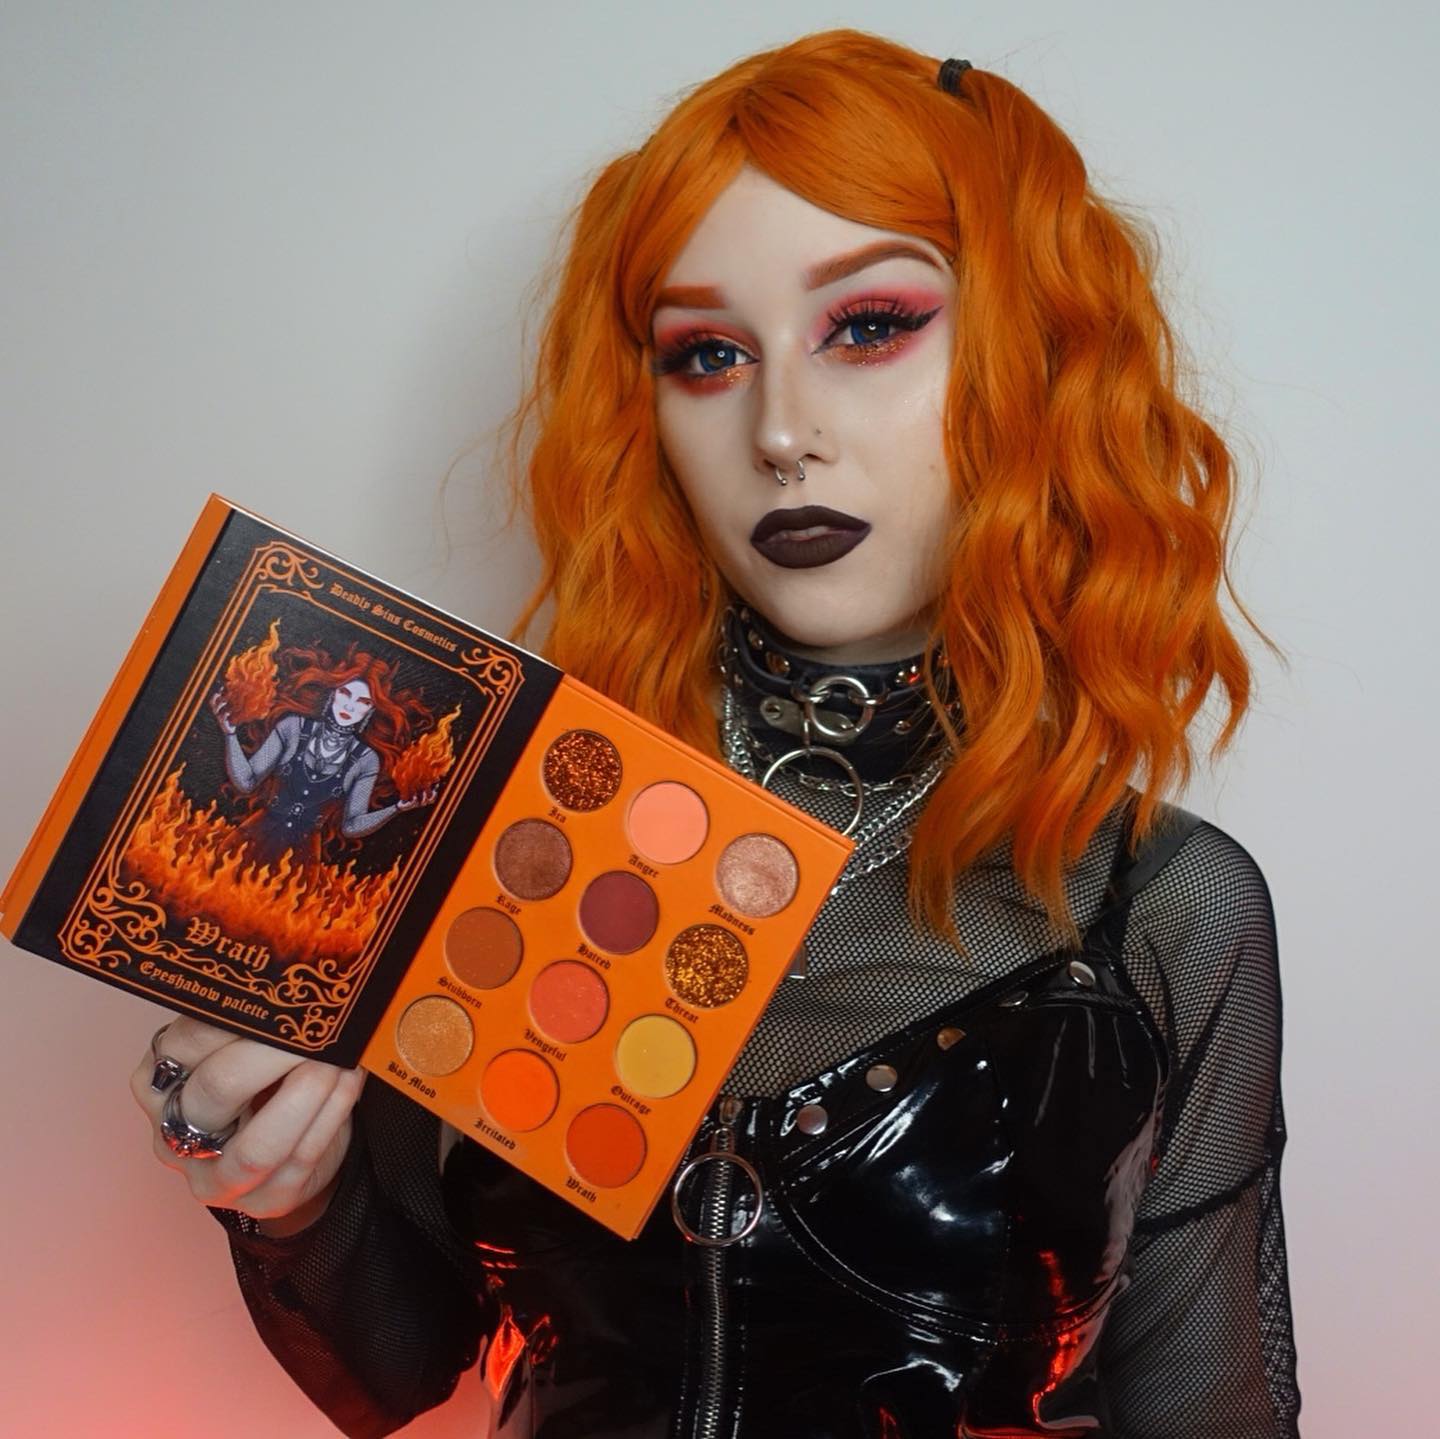 Wrath Orange and Red Eyeshadow Palette Deadly Sins Cosmetics Australian Gothic makeup girl holding makeup palette